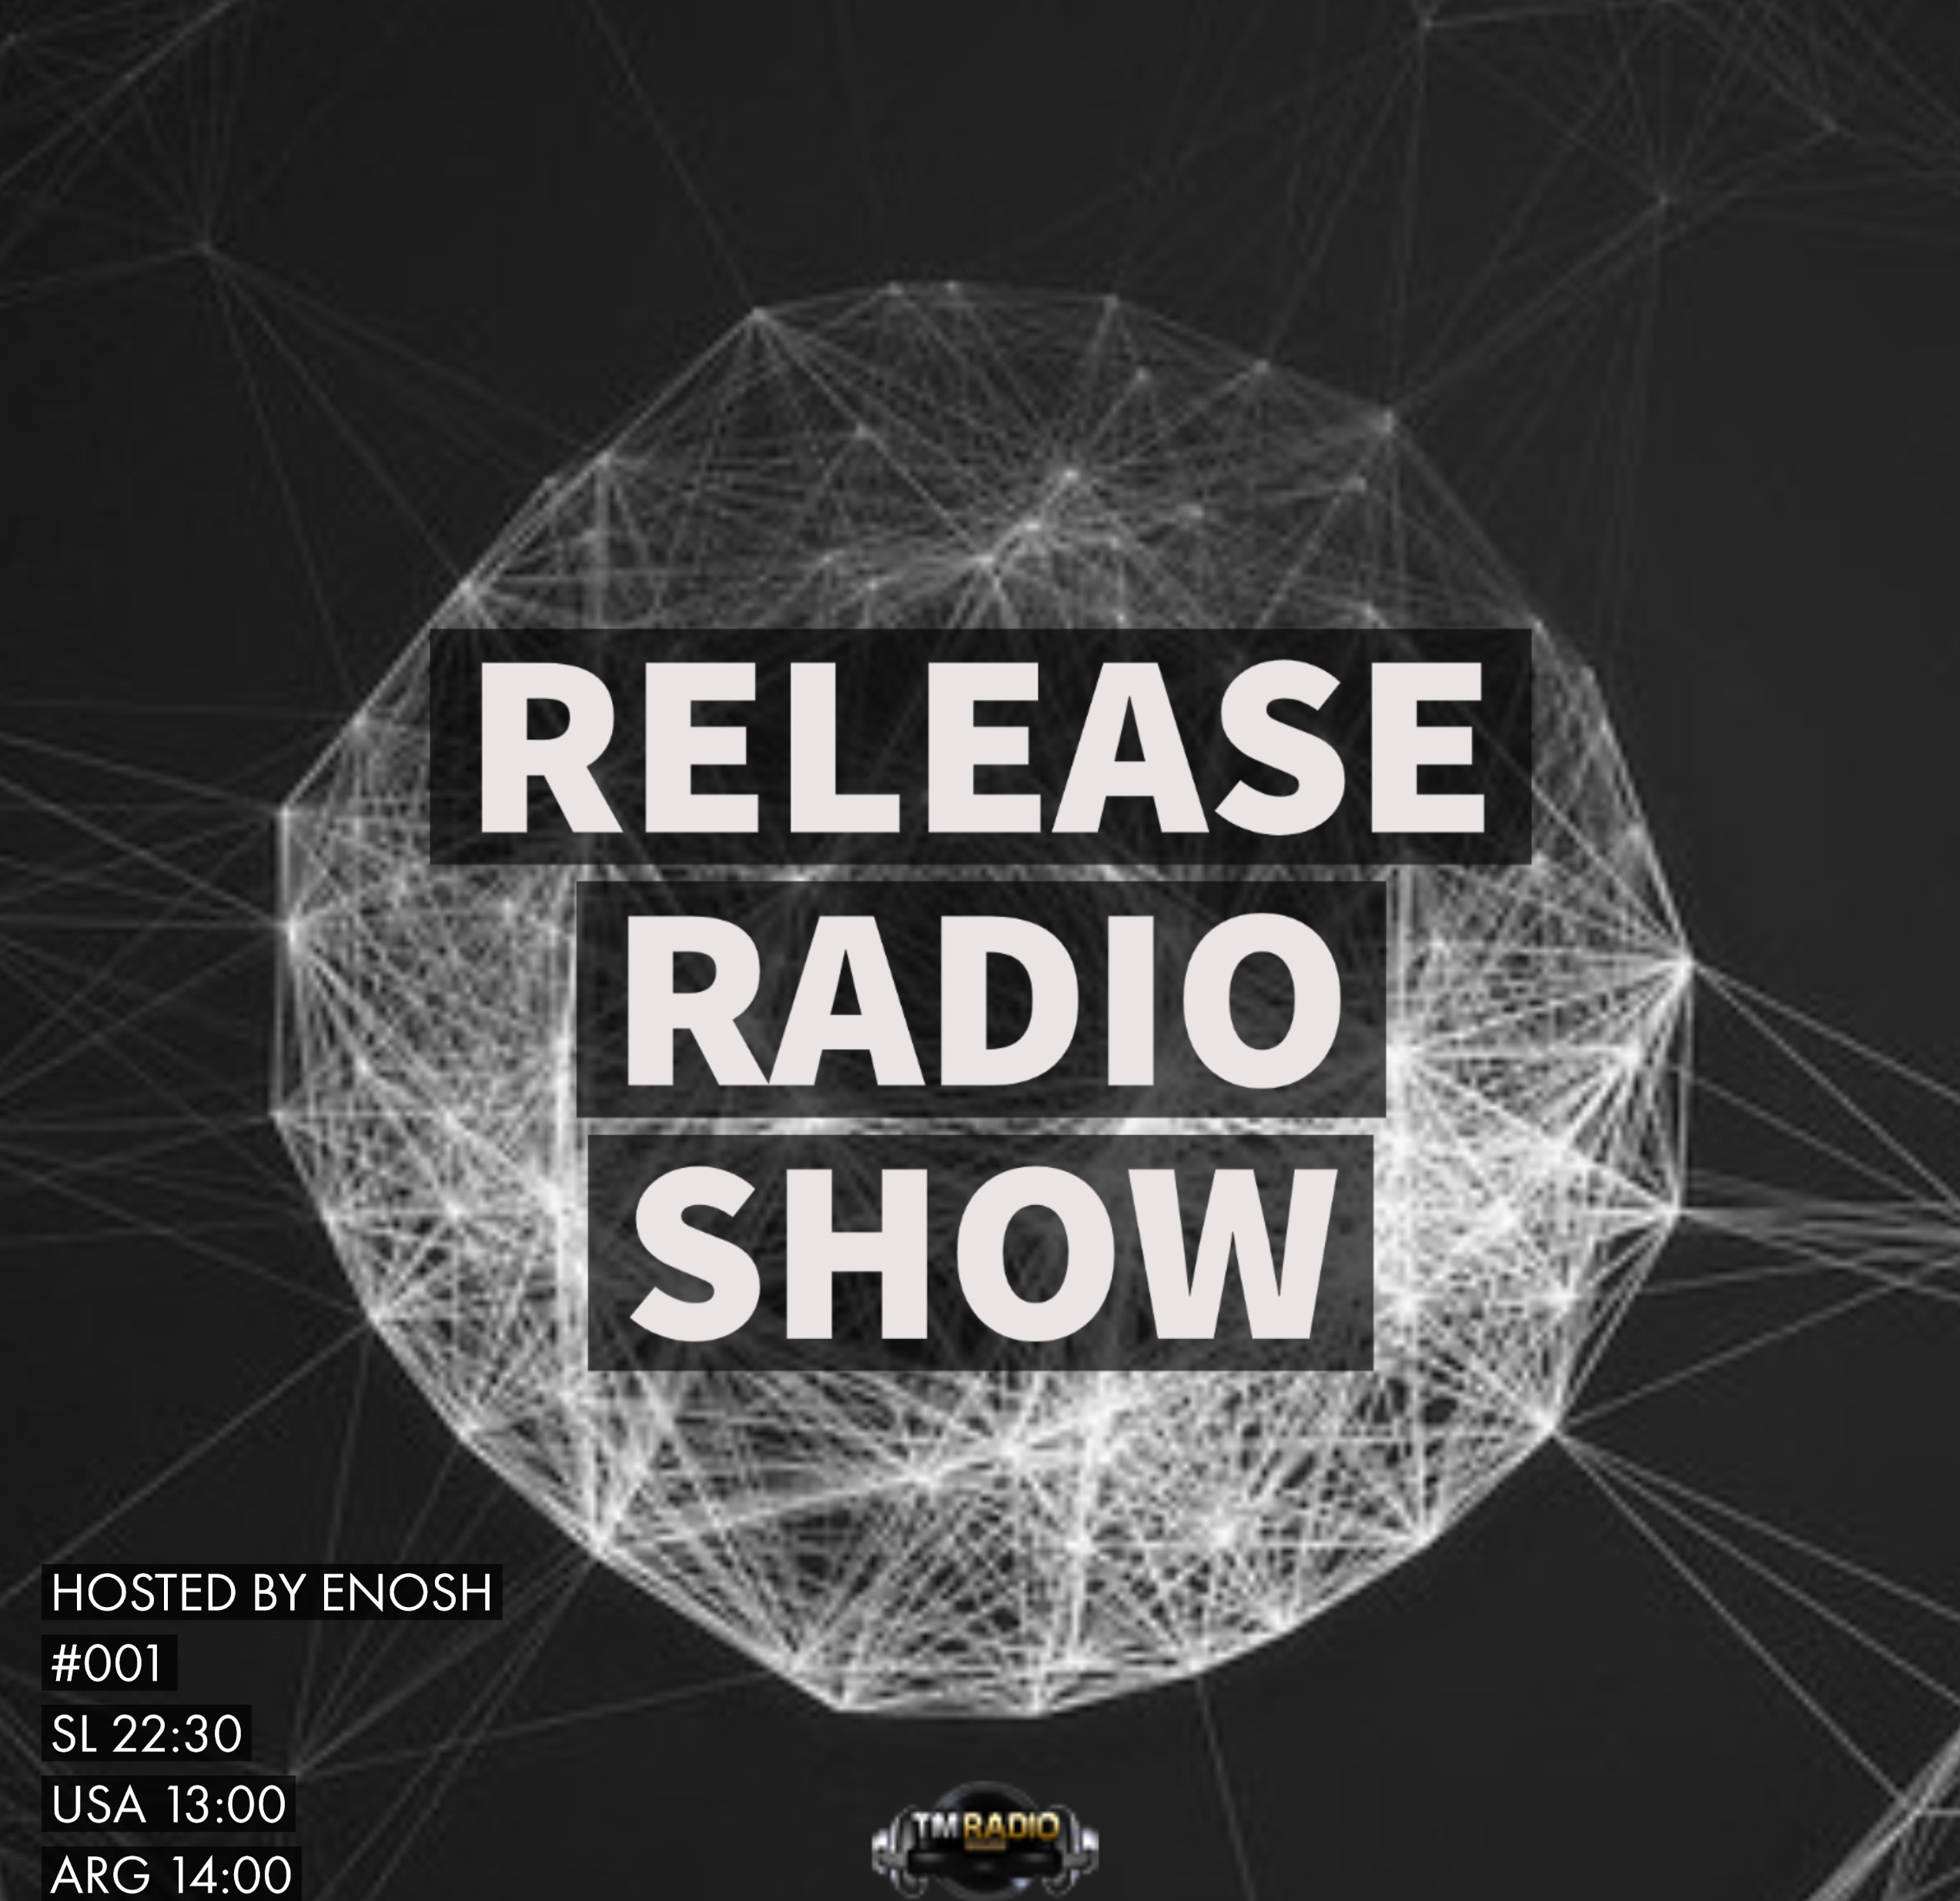 Grand Opening on TM Radio (from April 24th, 2020)